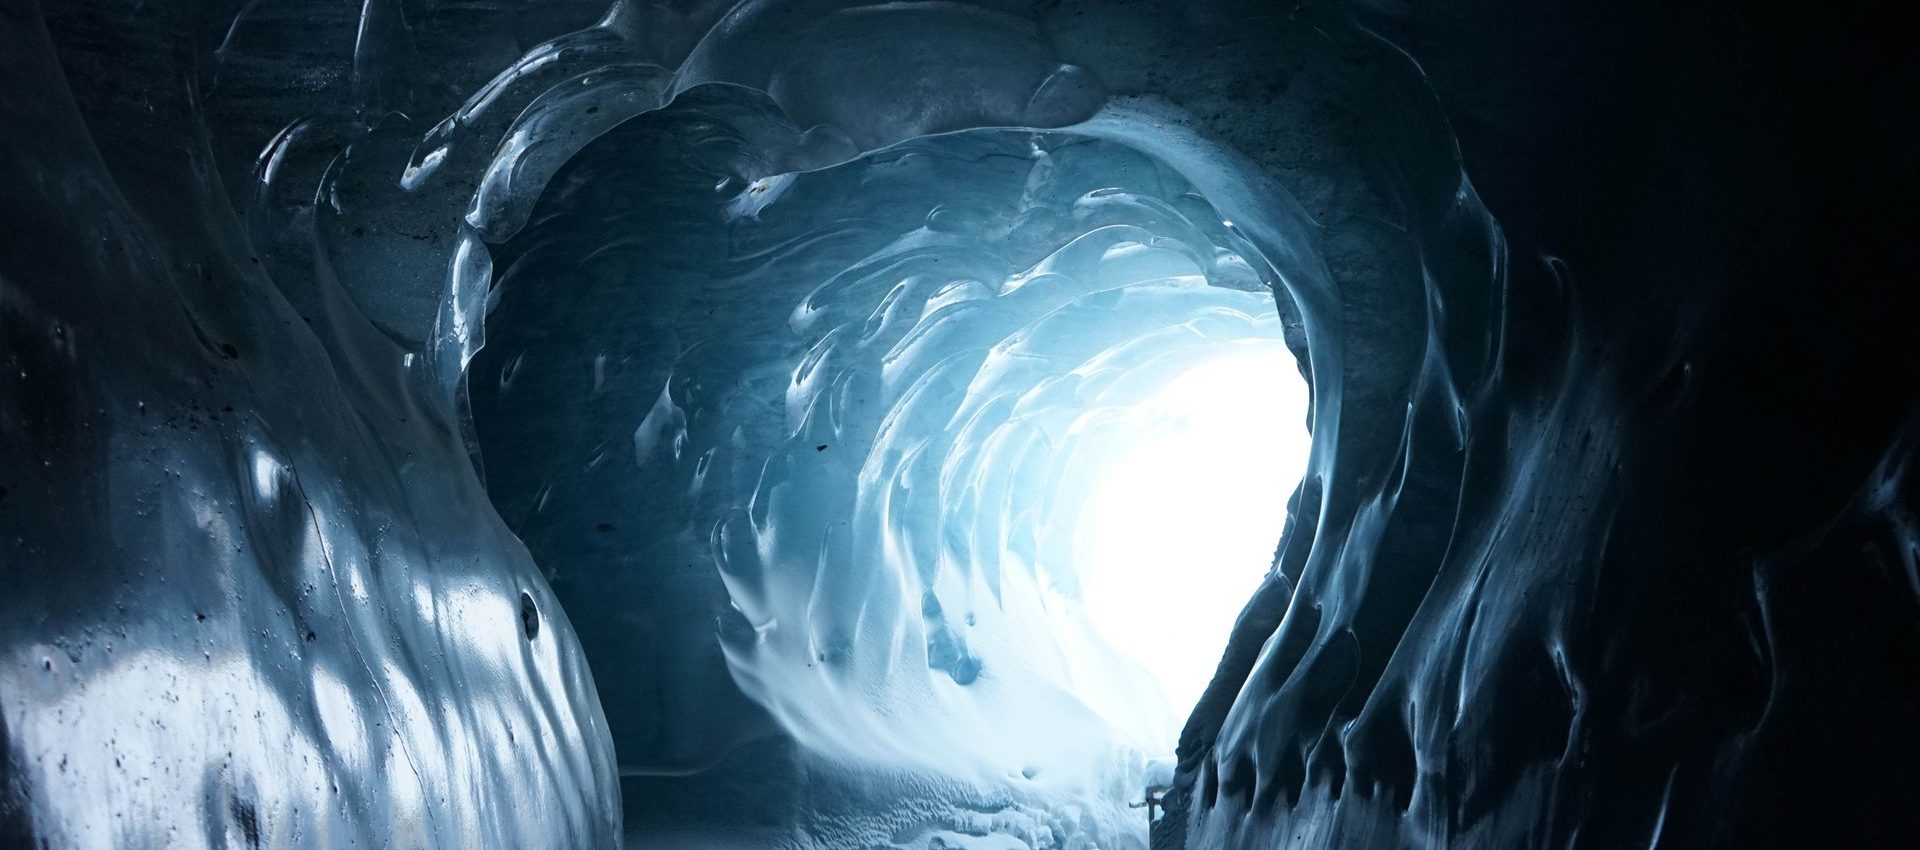 The beauty of the Vallee Blanche glacier cave is like something from a different world.